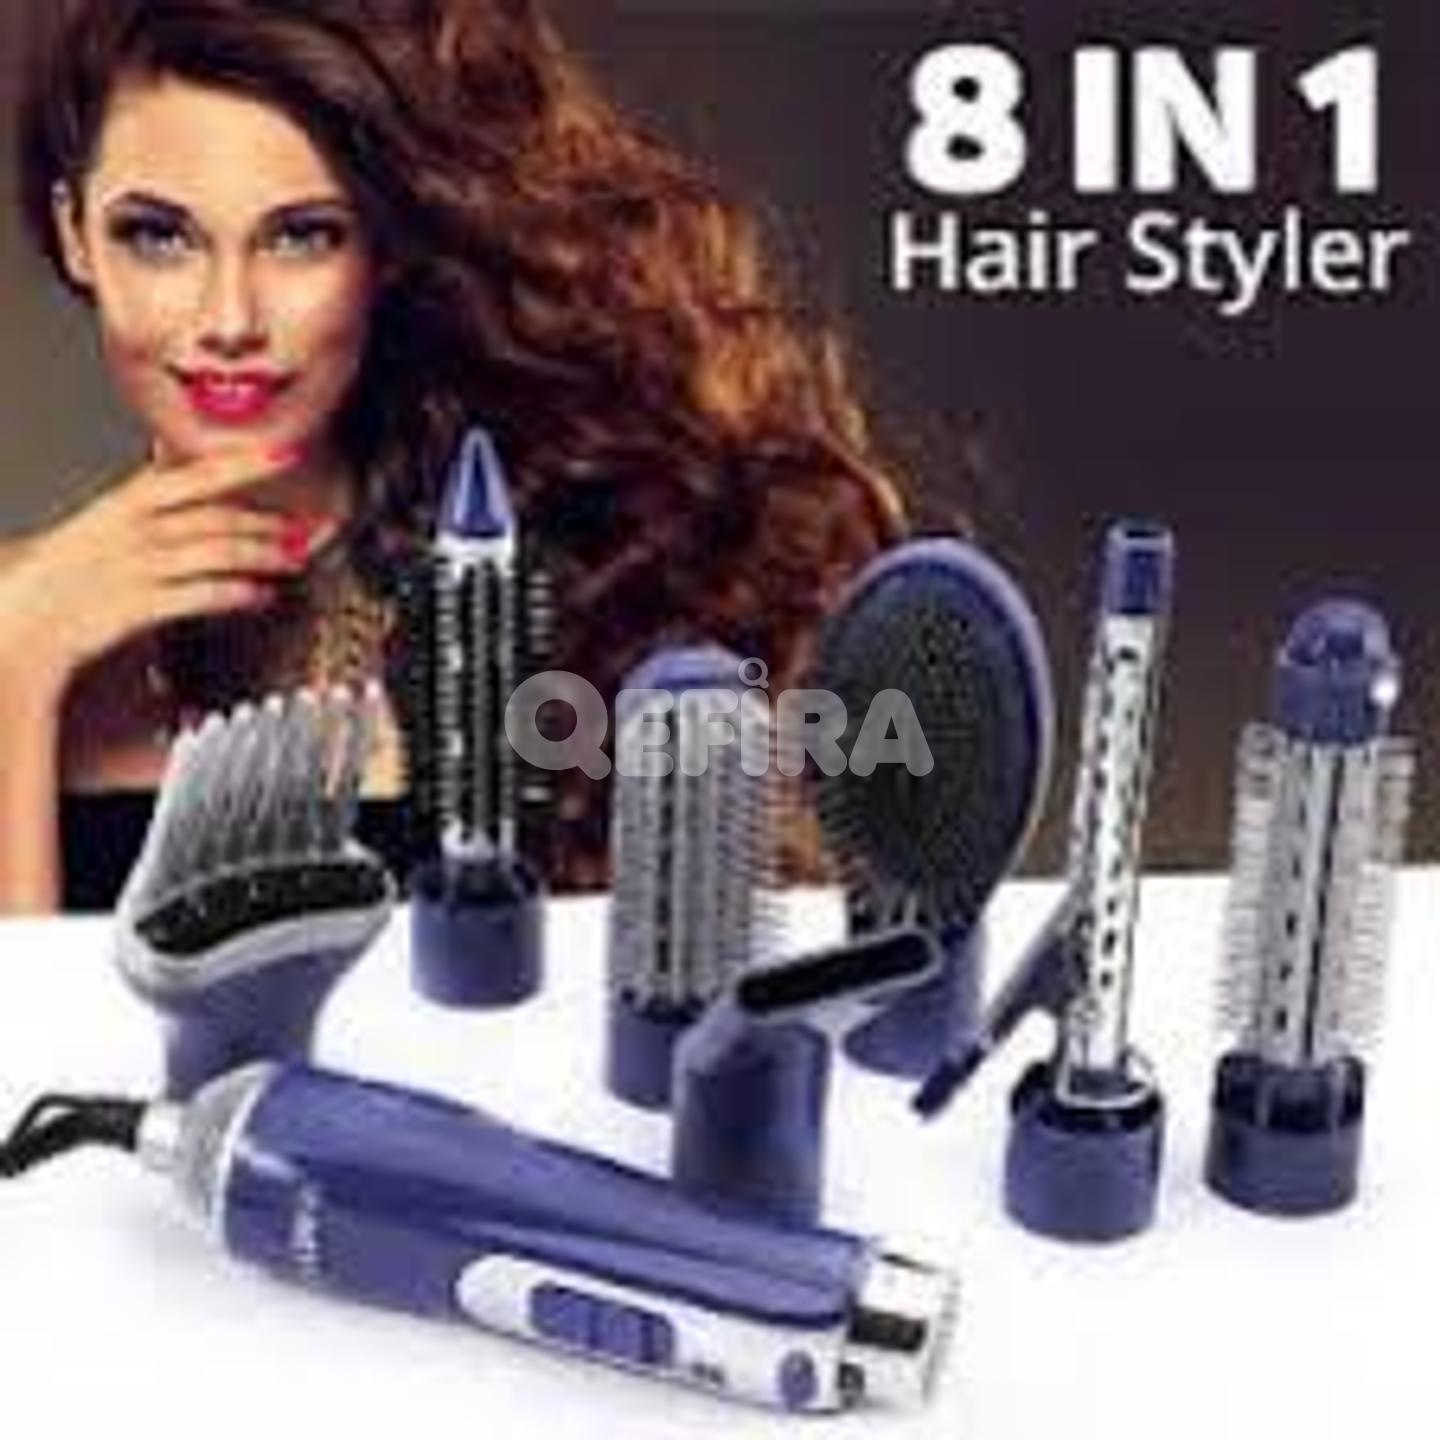 Hair Styler Geepas 8 In 1 With 360 Degree Swivel Cord in Yeka | Qefira